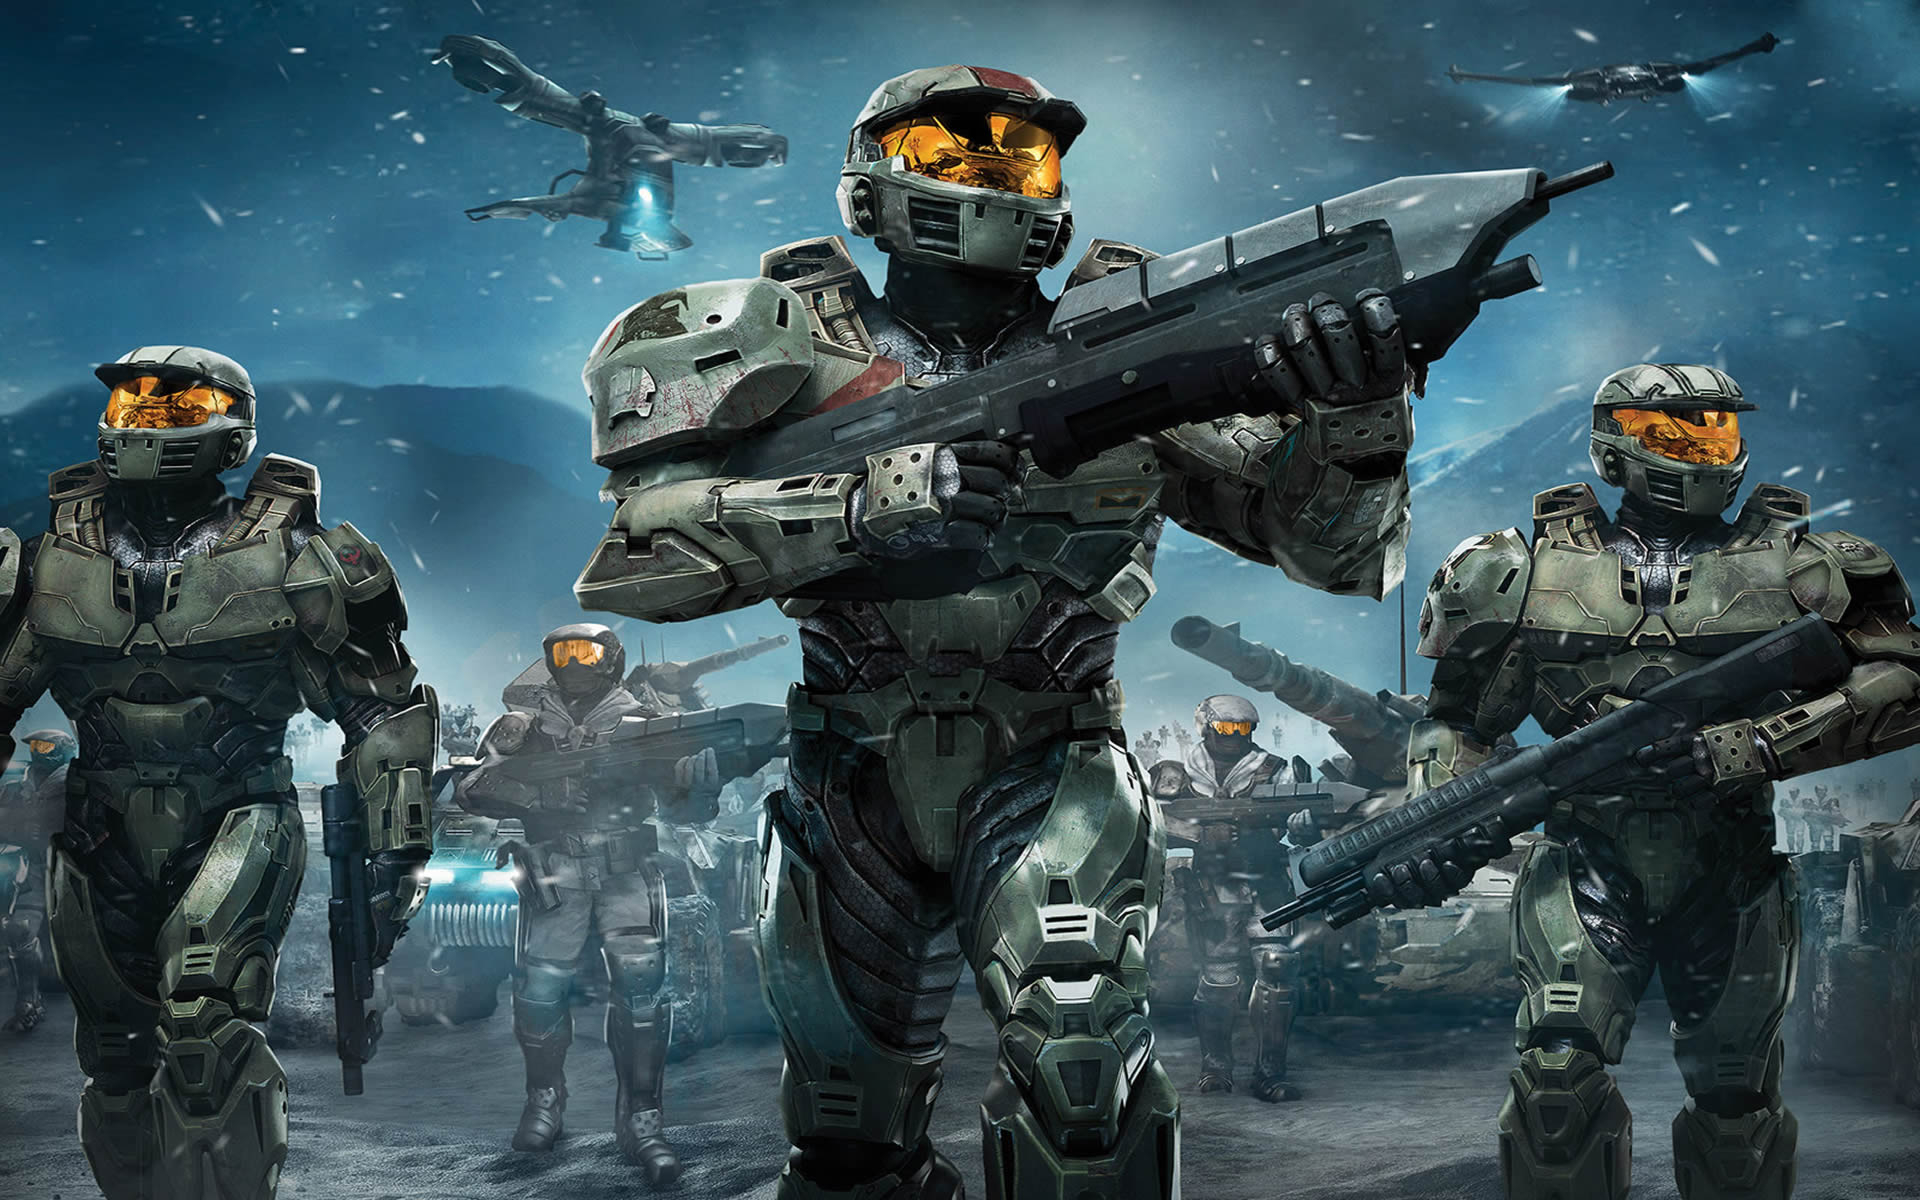 1920x1200 Free download Space Command Action Games Wallpaper Image featuring Halo Wars [] for your Desktop, Mobile \u0026 Tablet | Explore 66+ Space War Wallpaper | Civil War Wallpaper, God Of War Wallpaper